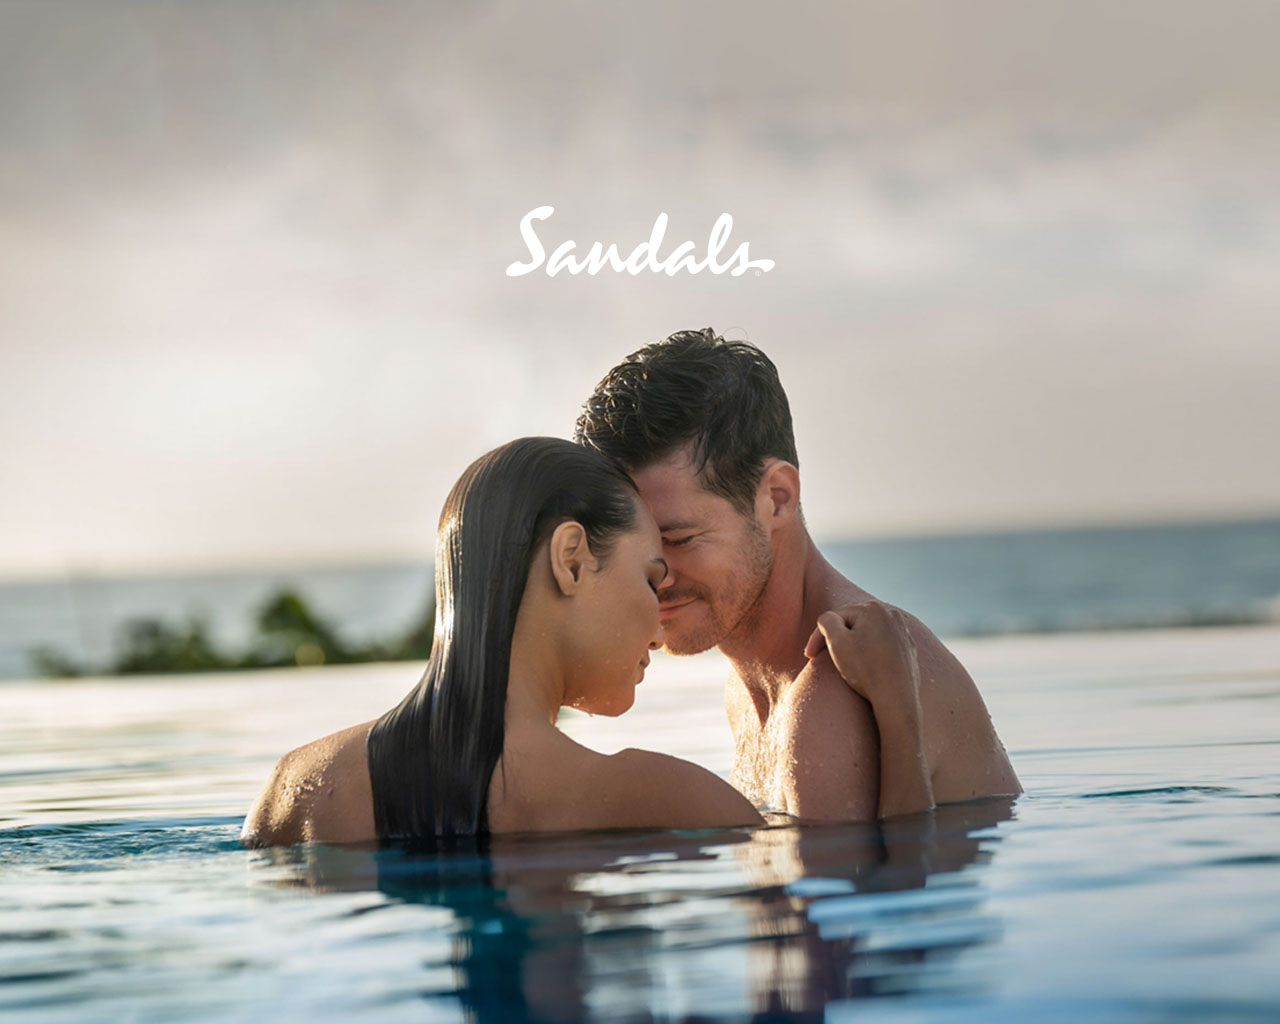 Sandals® AllInclusive Holidays & Vacations in the Caribbean